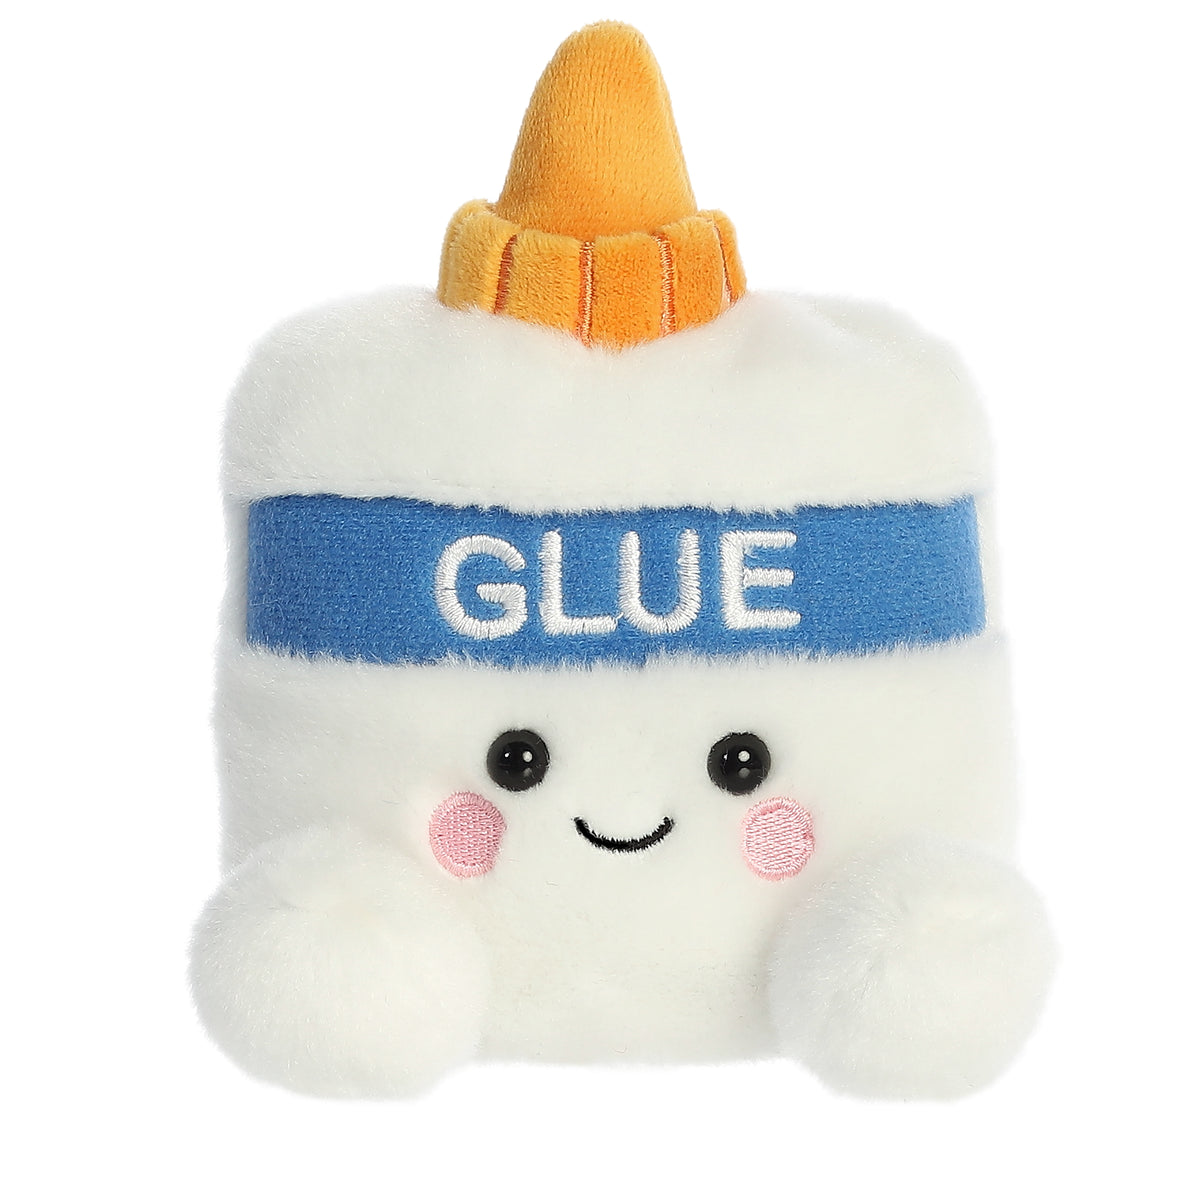 Gooey Glue plush from Palm Pals, white with a blue band and golden cap, with "GLUE" written on its plush body